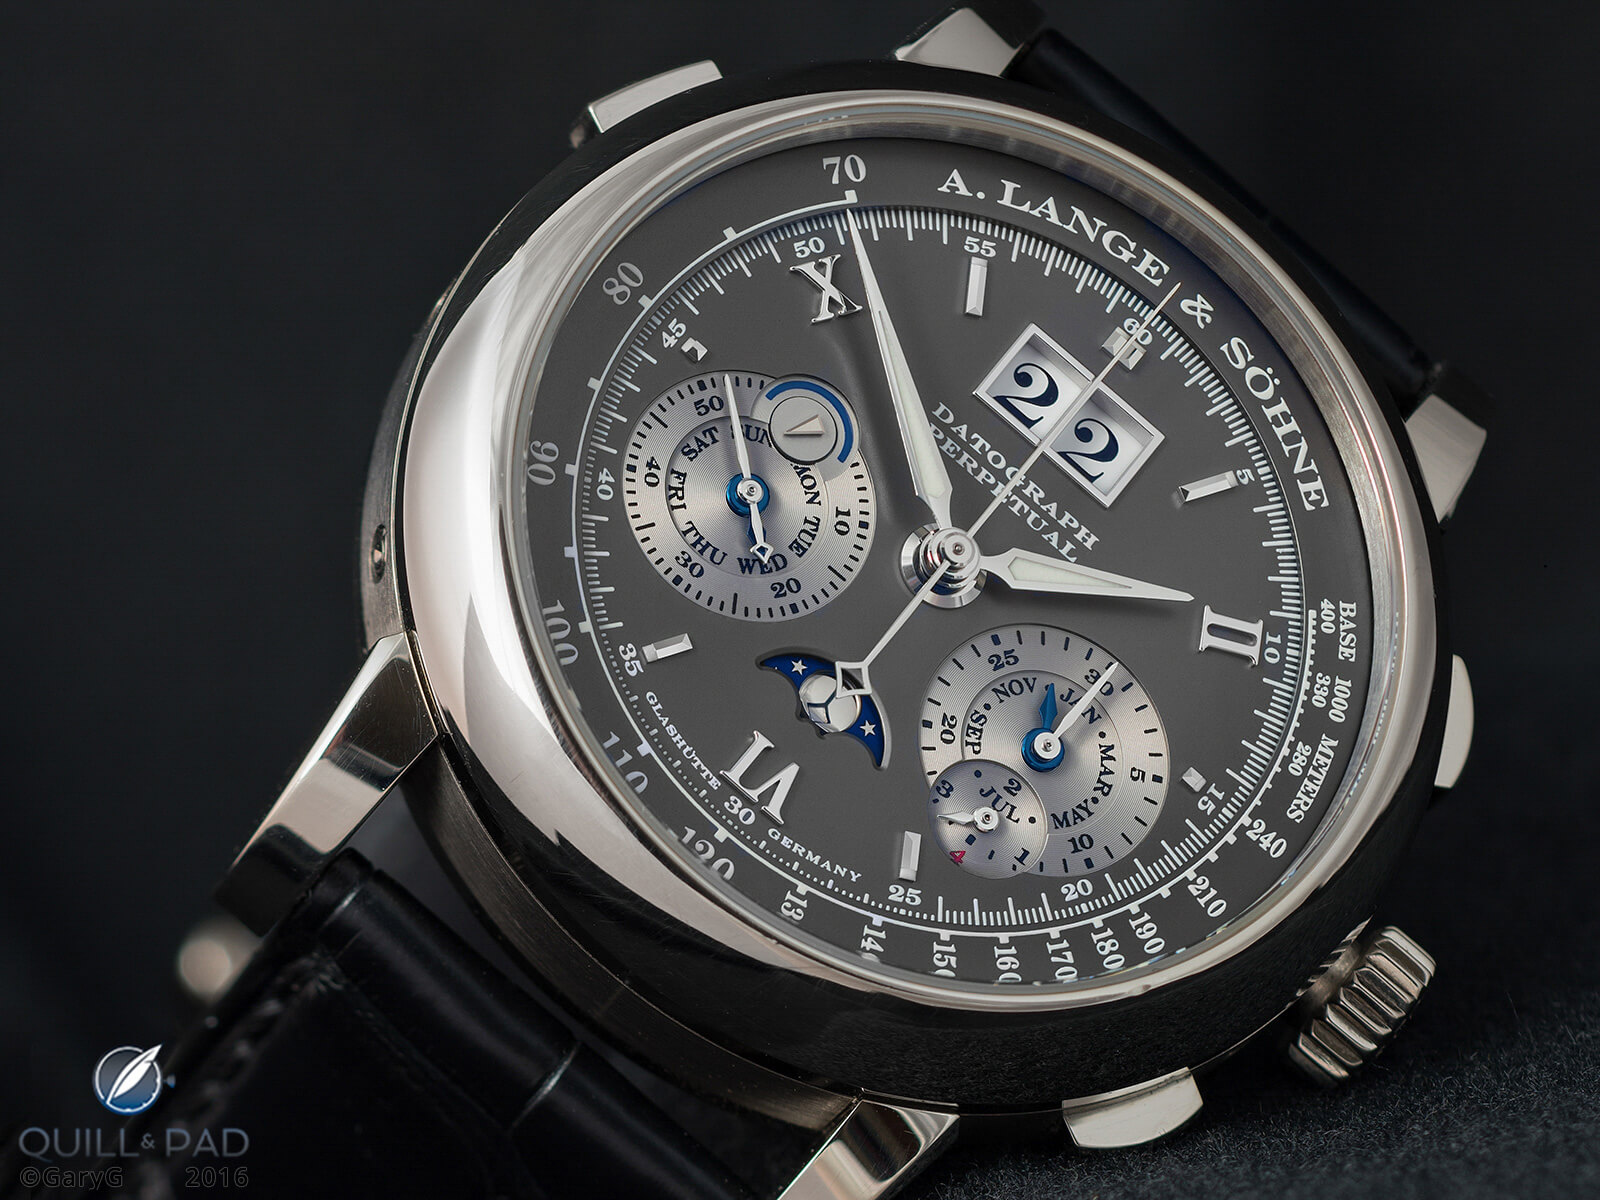 Beautiful, but functional as well: A. Lange & Söhne Datograph Perpetual